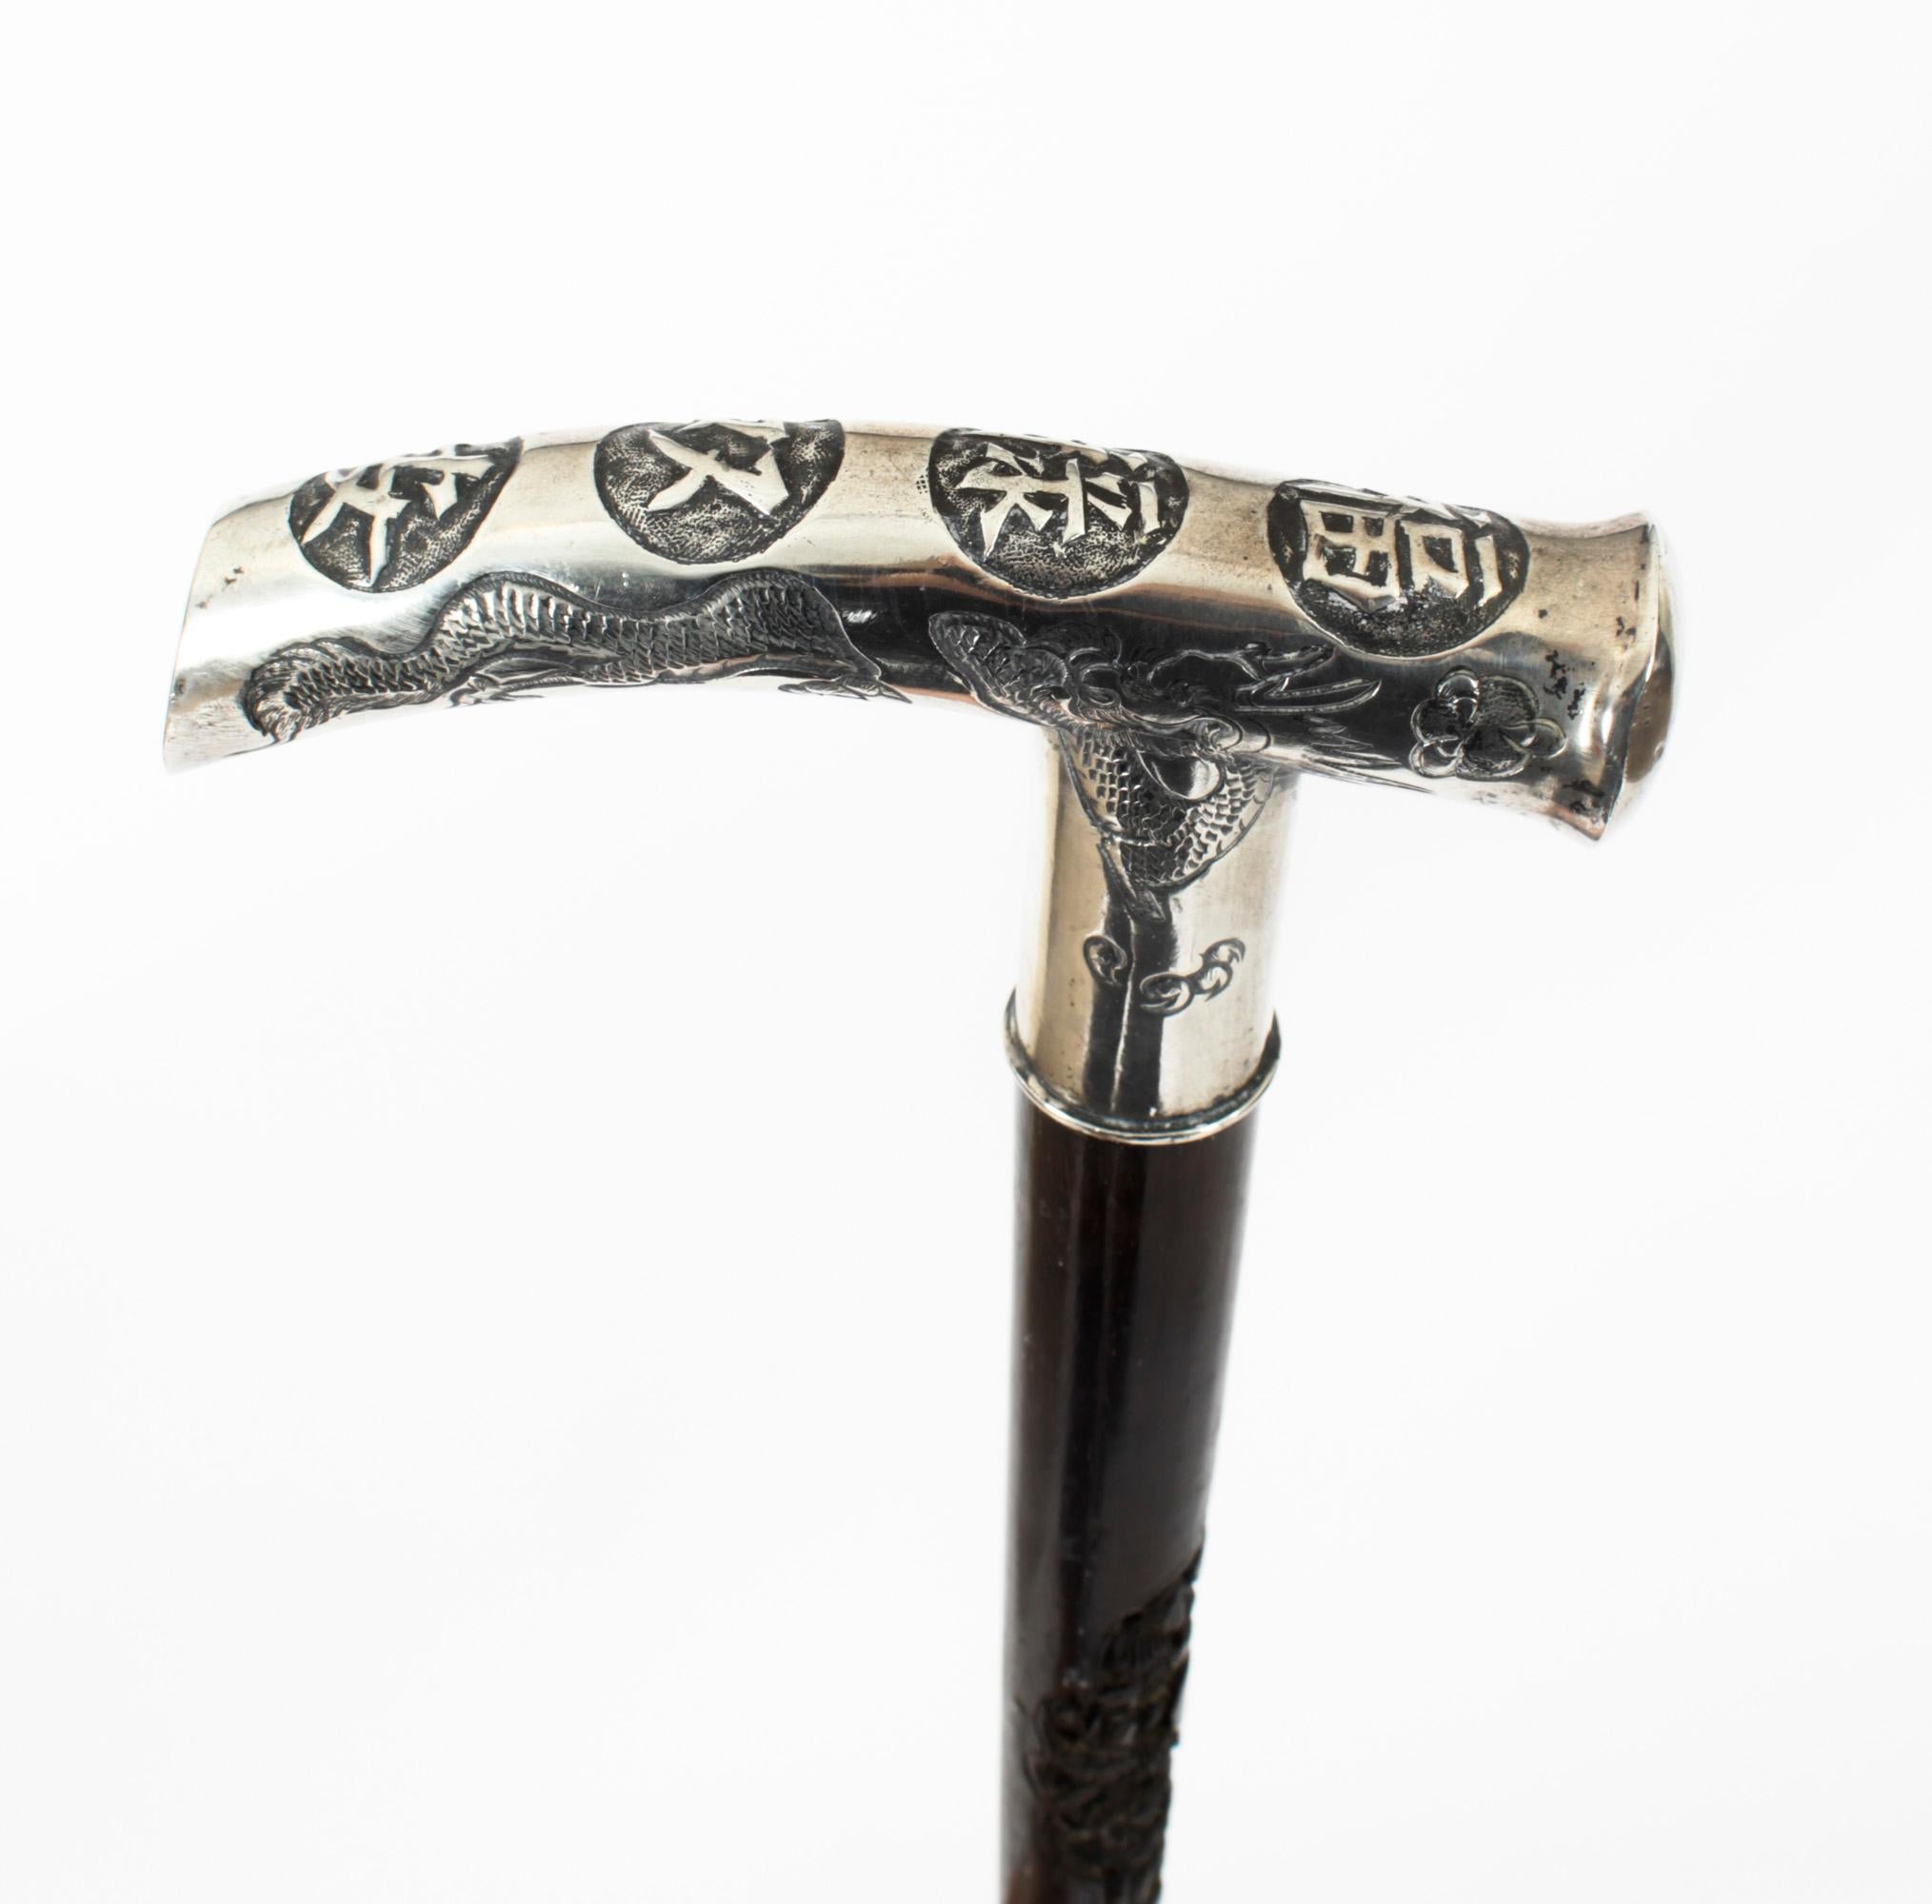 This is a superb quality gentleman's antique Japanese silver pommel and malacca shaft walking stick, circa 1880 in date.
 
The cane has a traditional silver crook pommel decorated with Japanese writing on a superbly carved Malacca tapering shaft